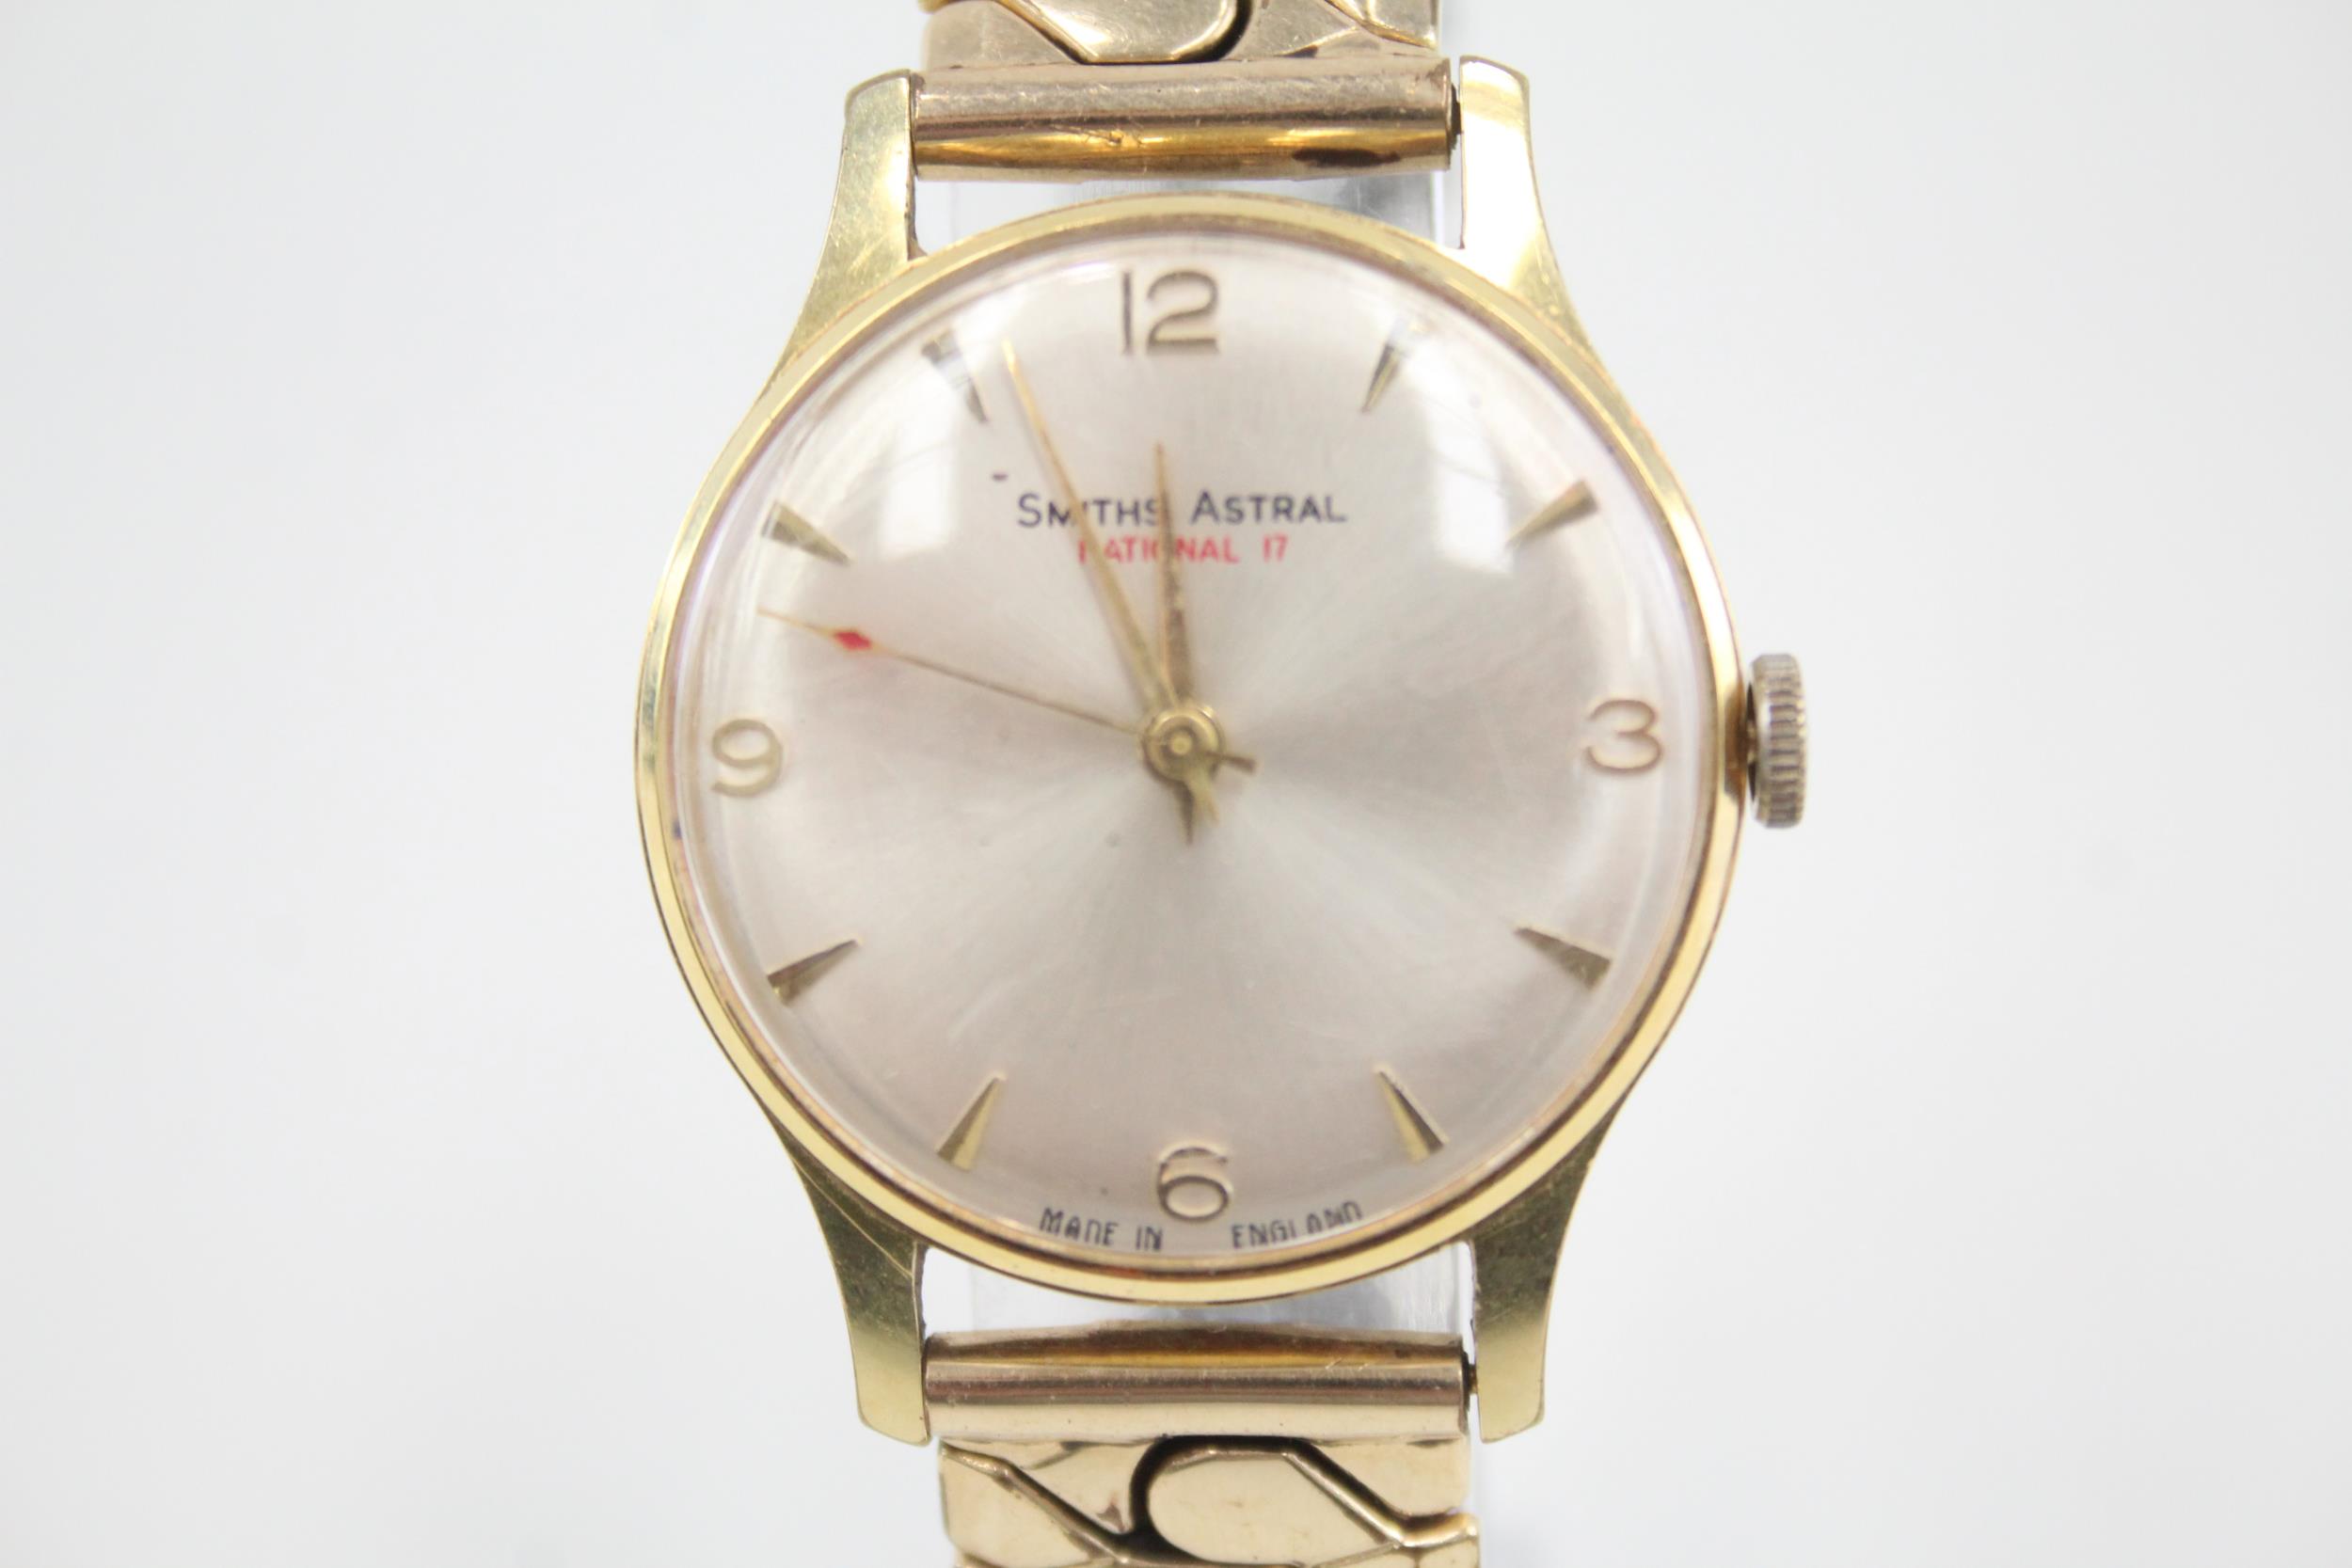 Smiths Astral National 17 Gold Tone WRISTWATCH Hand-Wind WORKING - Smiths Astral National 17 Gold - Image 2 of 4